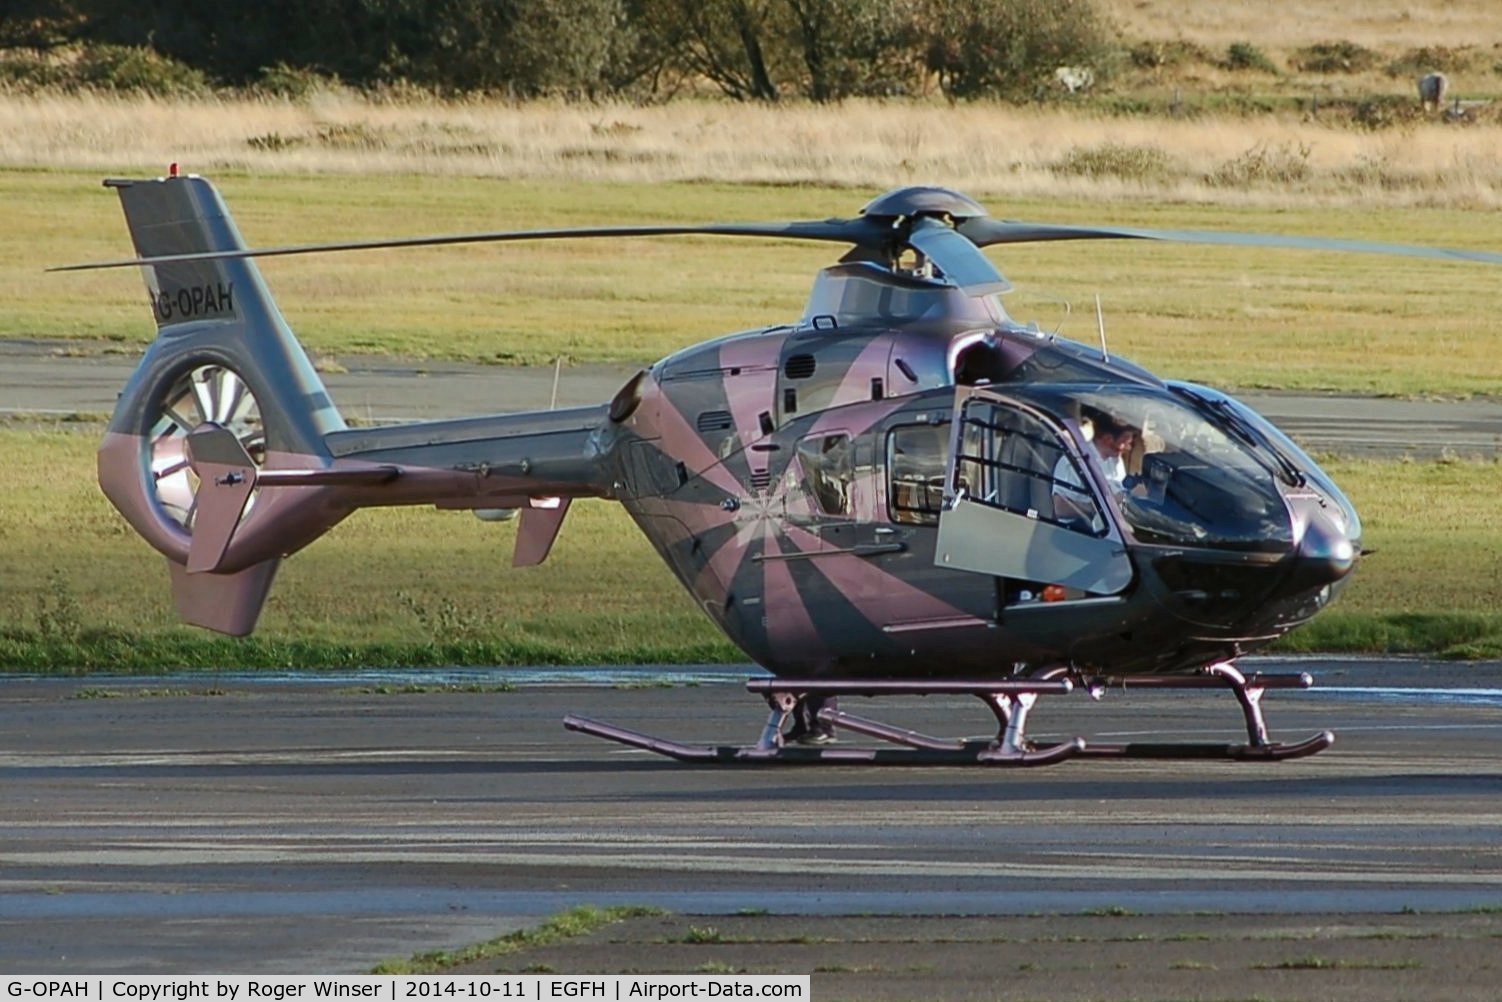 G-OPAH, 2007 Eurocopter EC-135T-2+ C/N 0635, Interesting colour scheme on visiting helicopter operated by VLL Ltd.